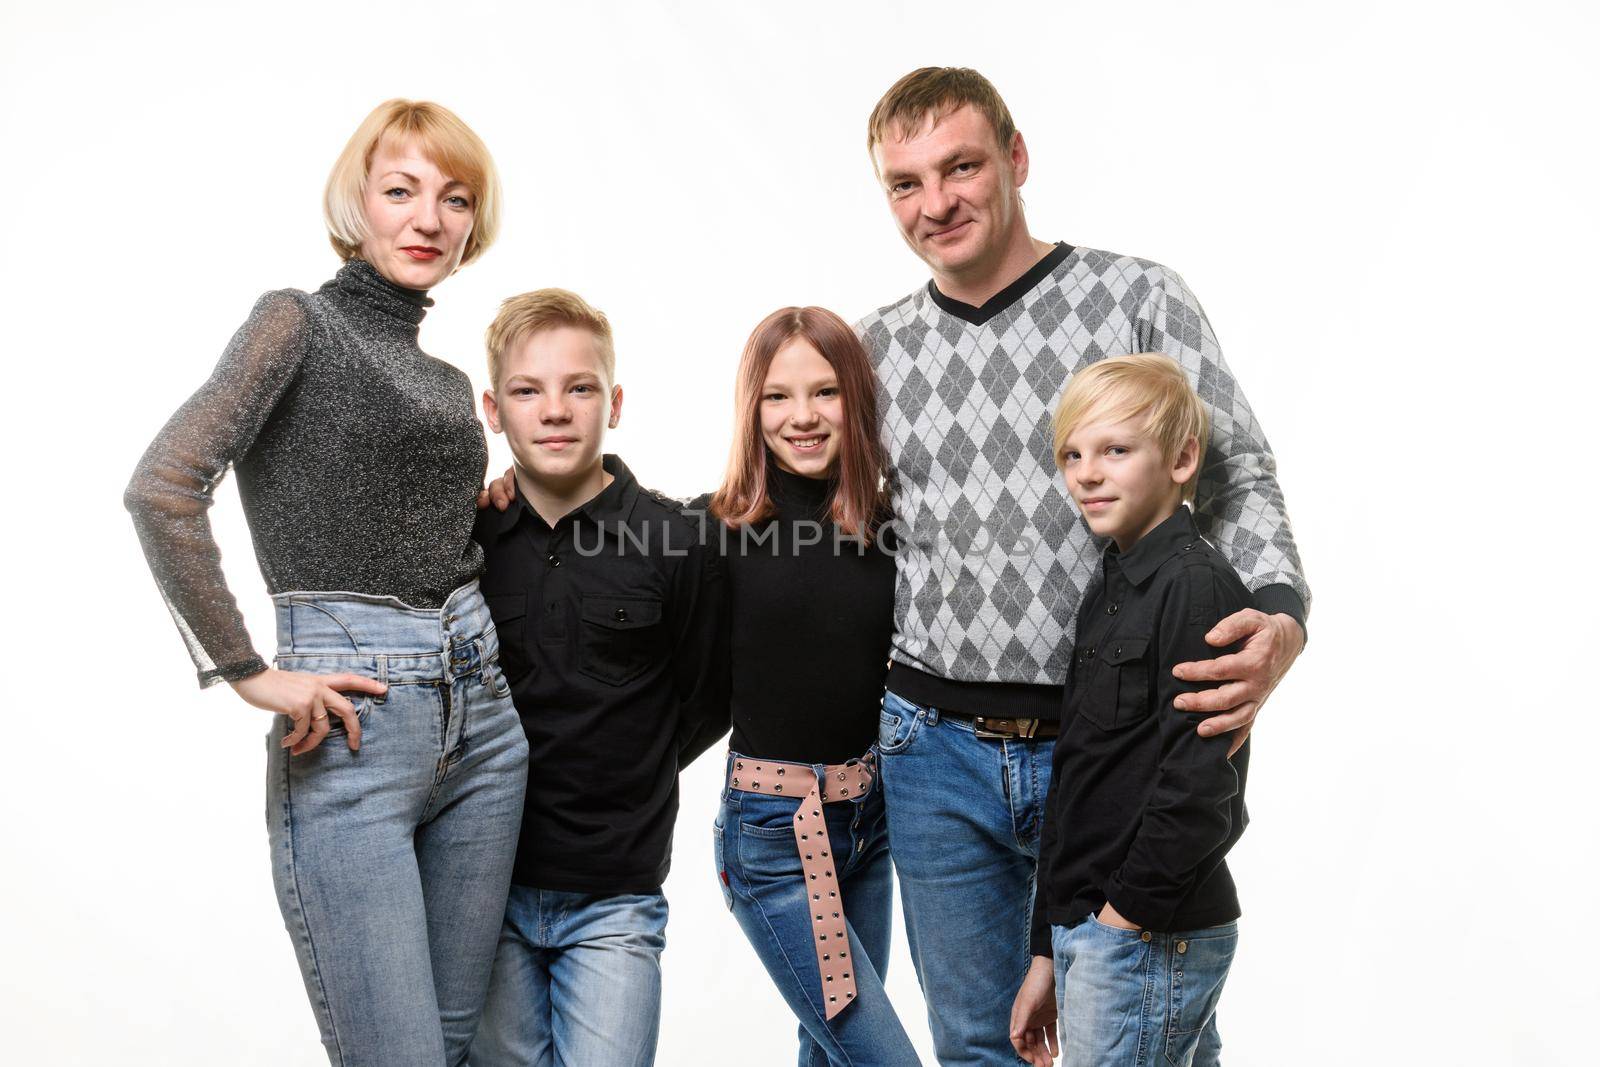 Large adult Russian family in casual clothes, isolated on white background by Madhourse